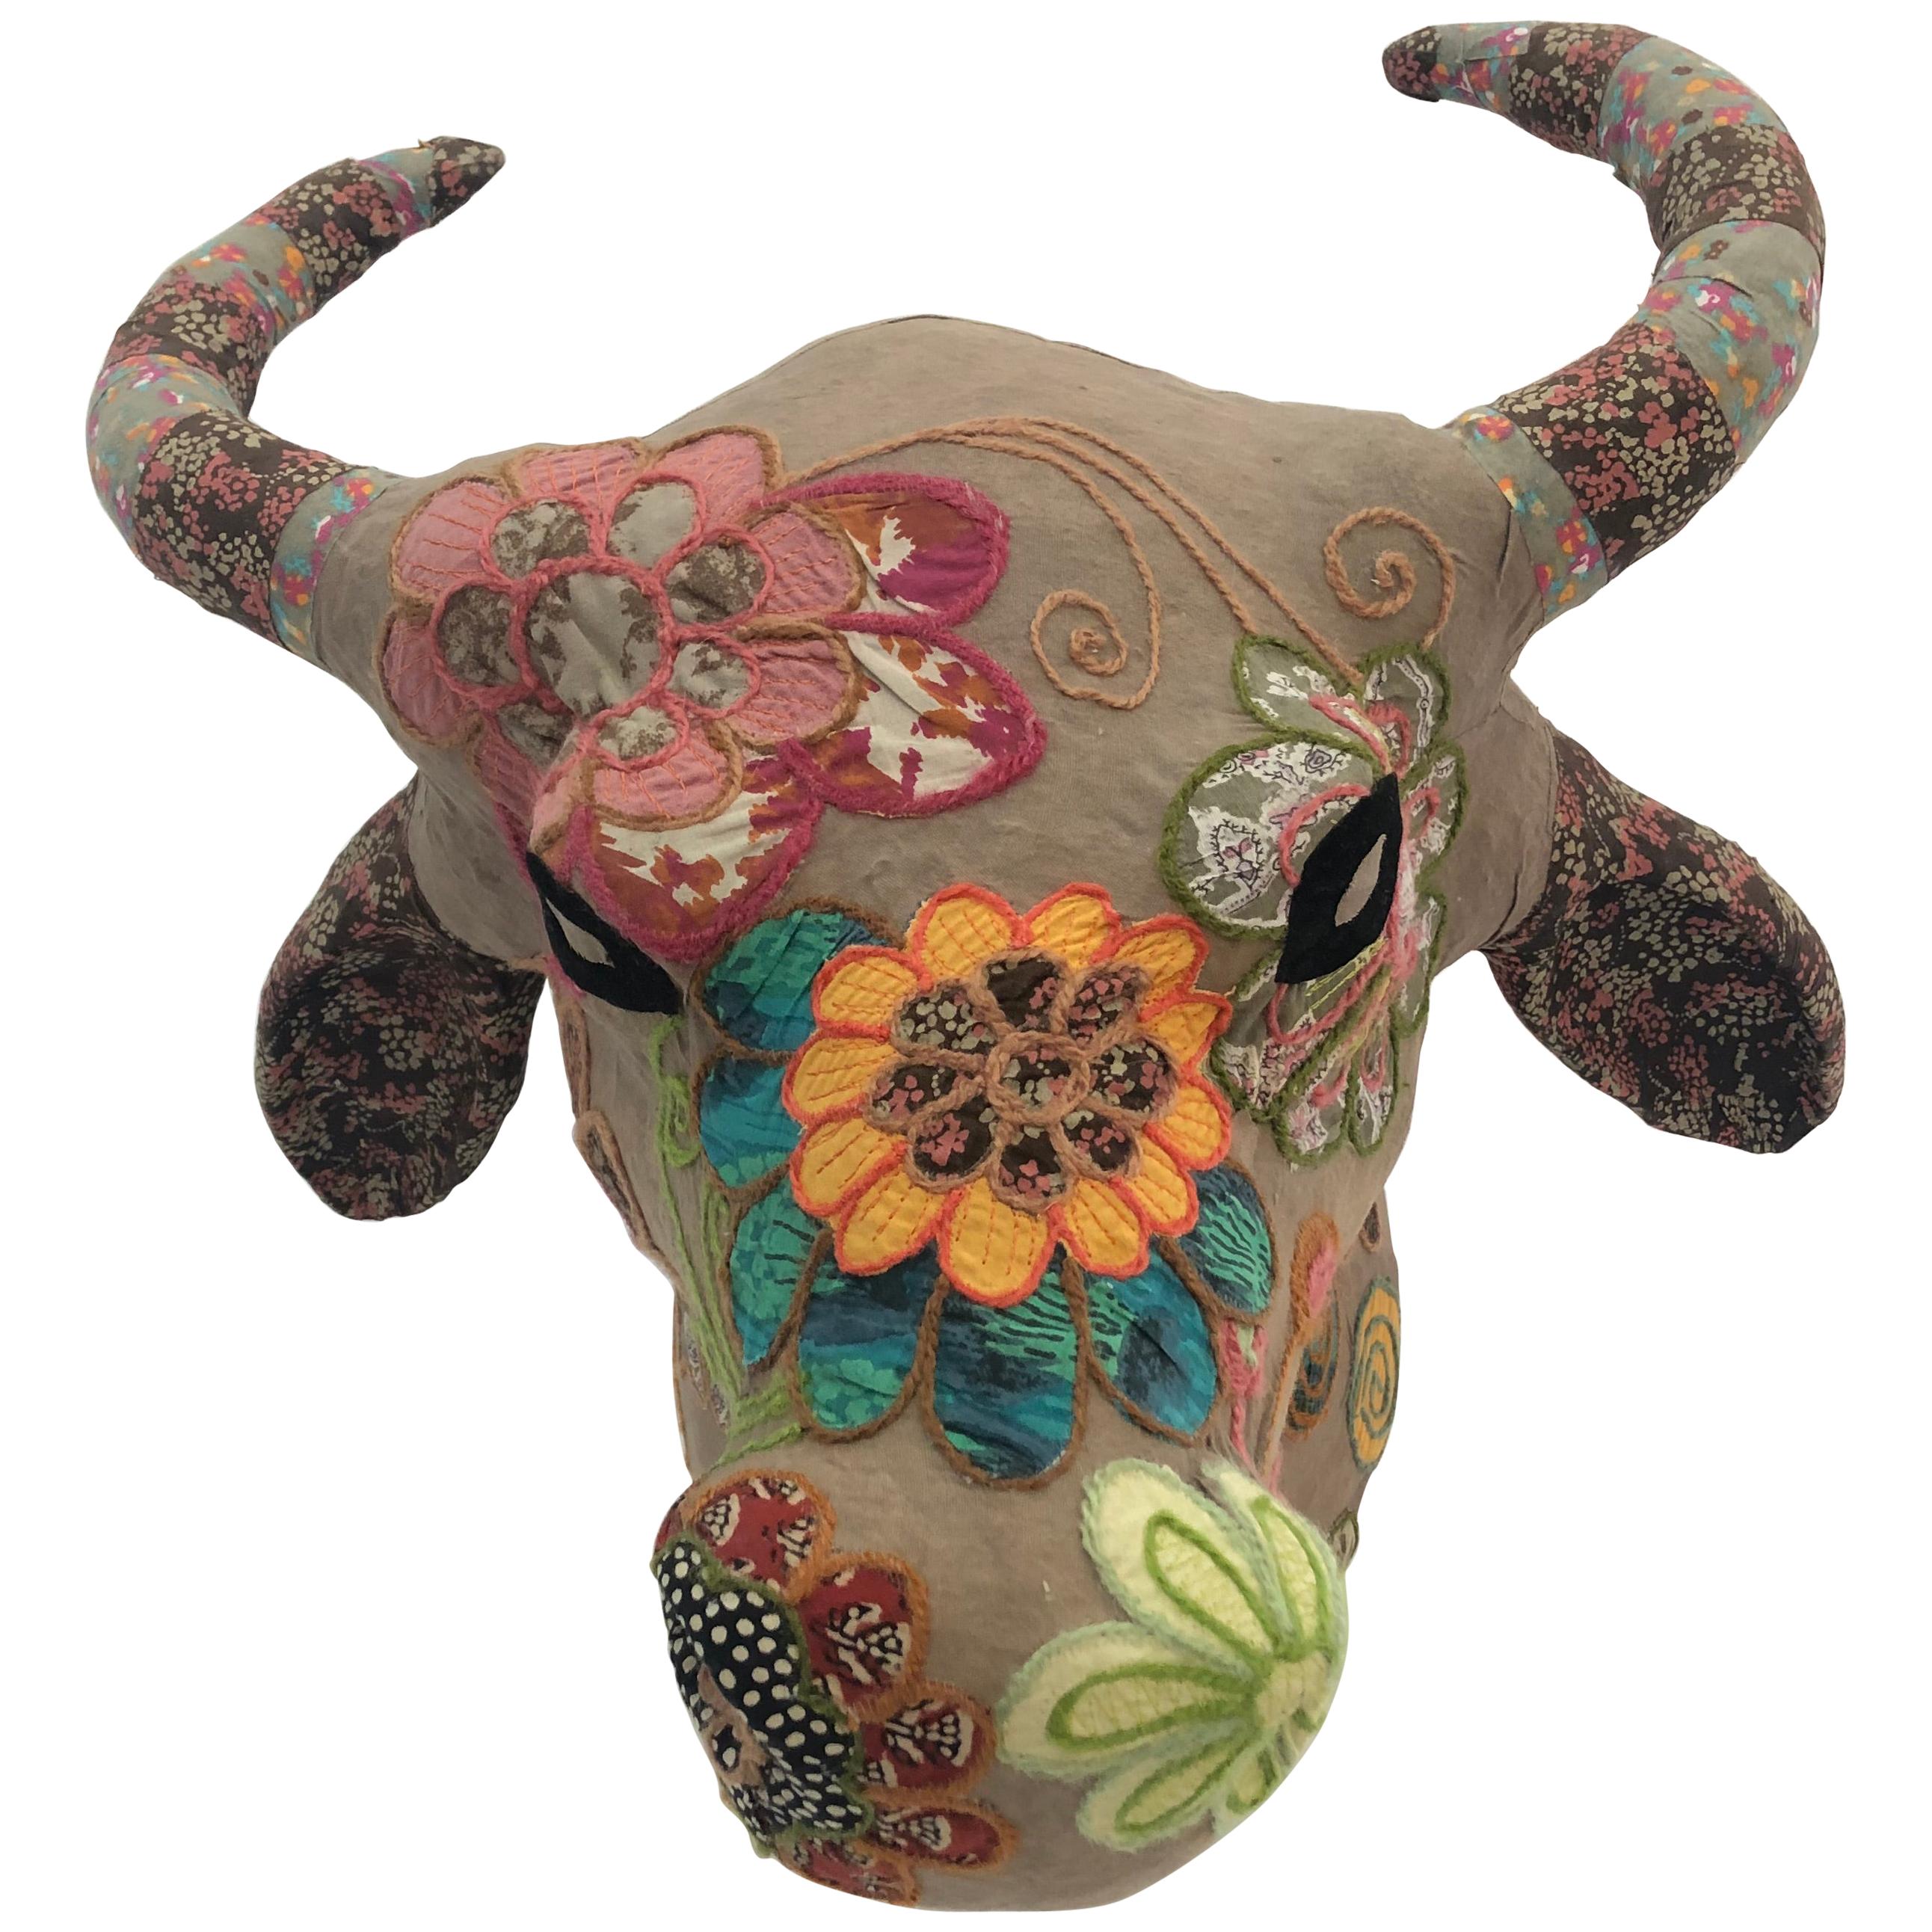 Whimsical Handmade Mixed-Media Wall Sculpture of Bull's Head with Horns